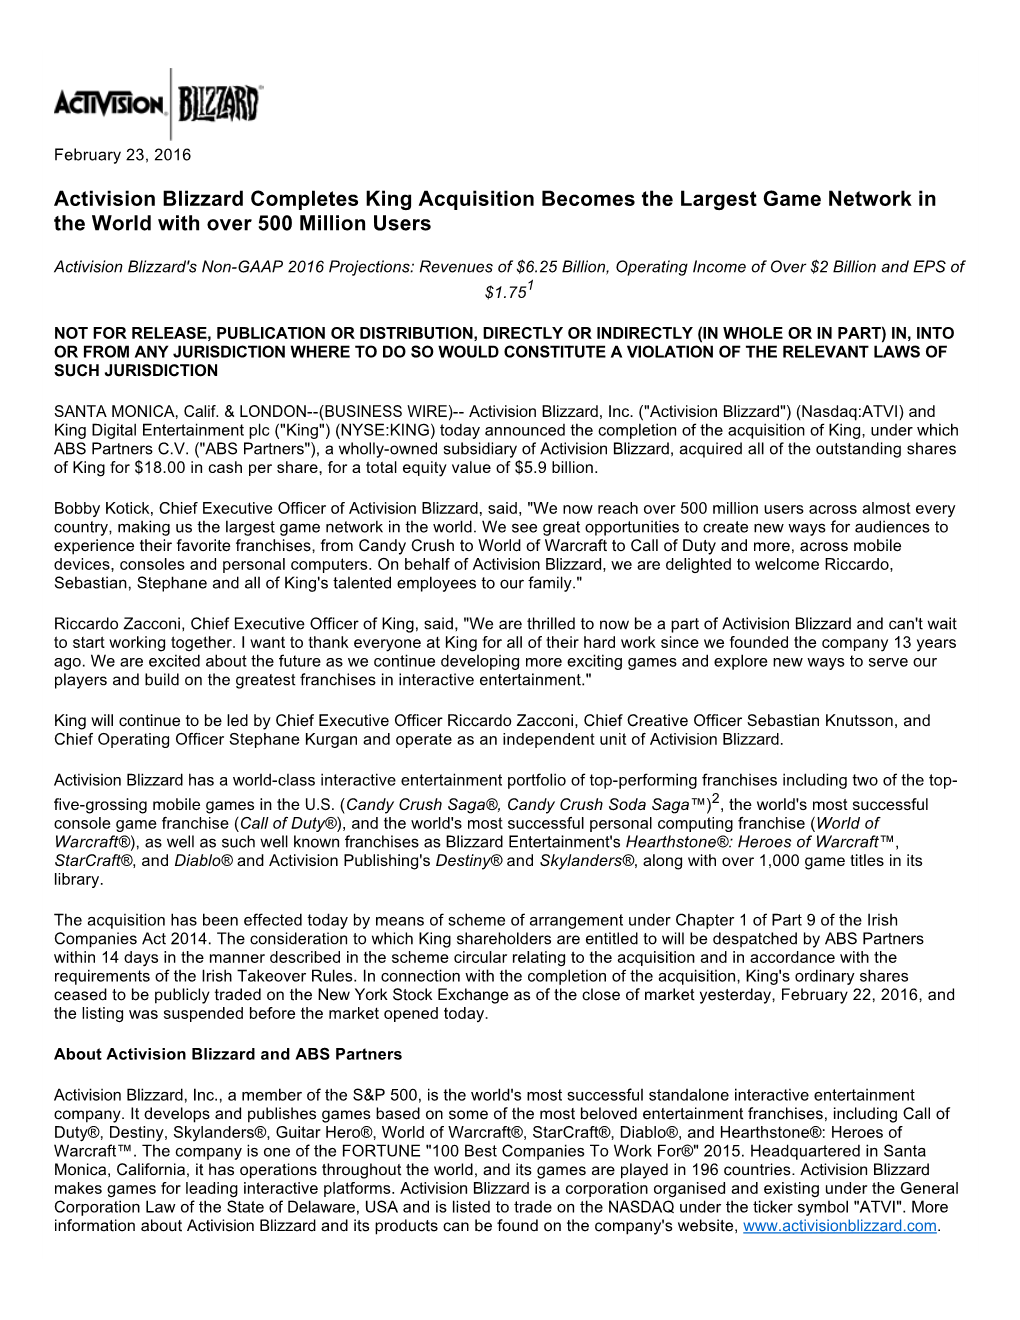 Activision Blizzard Completes King Acquisition Becomes the Largest Game Network in the World with Over 500 Million Users